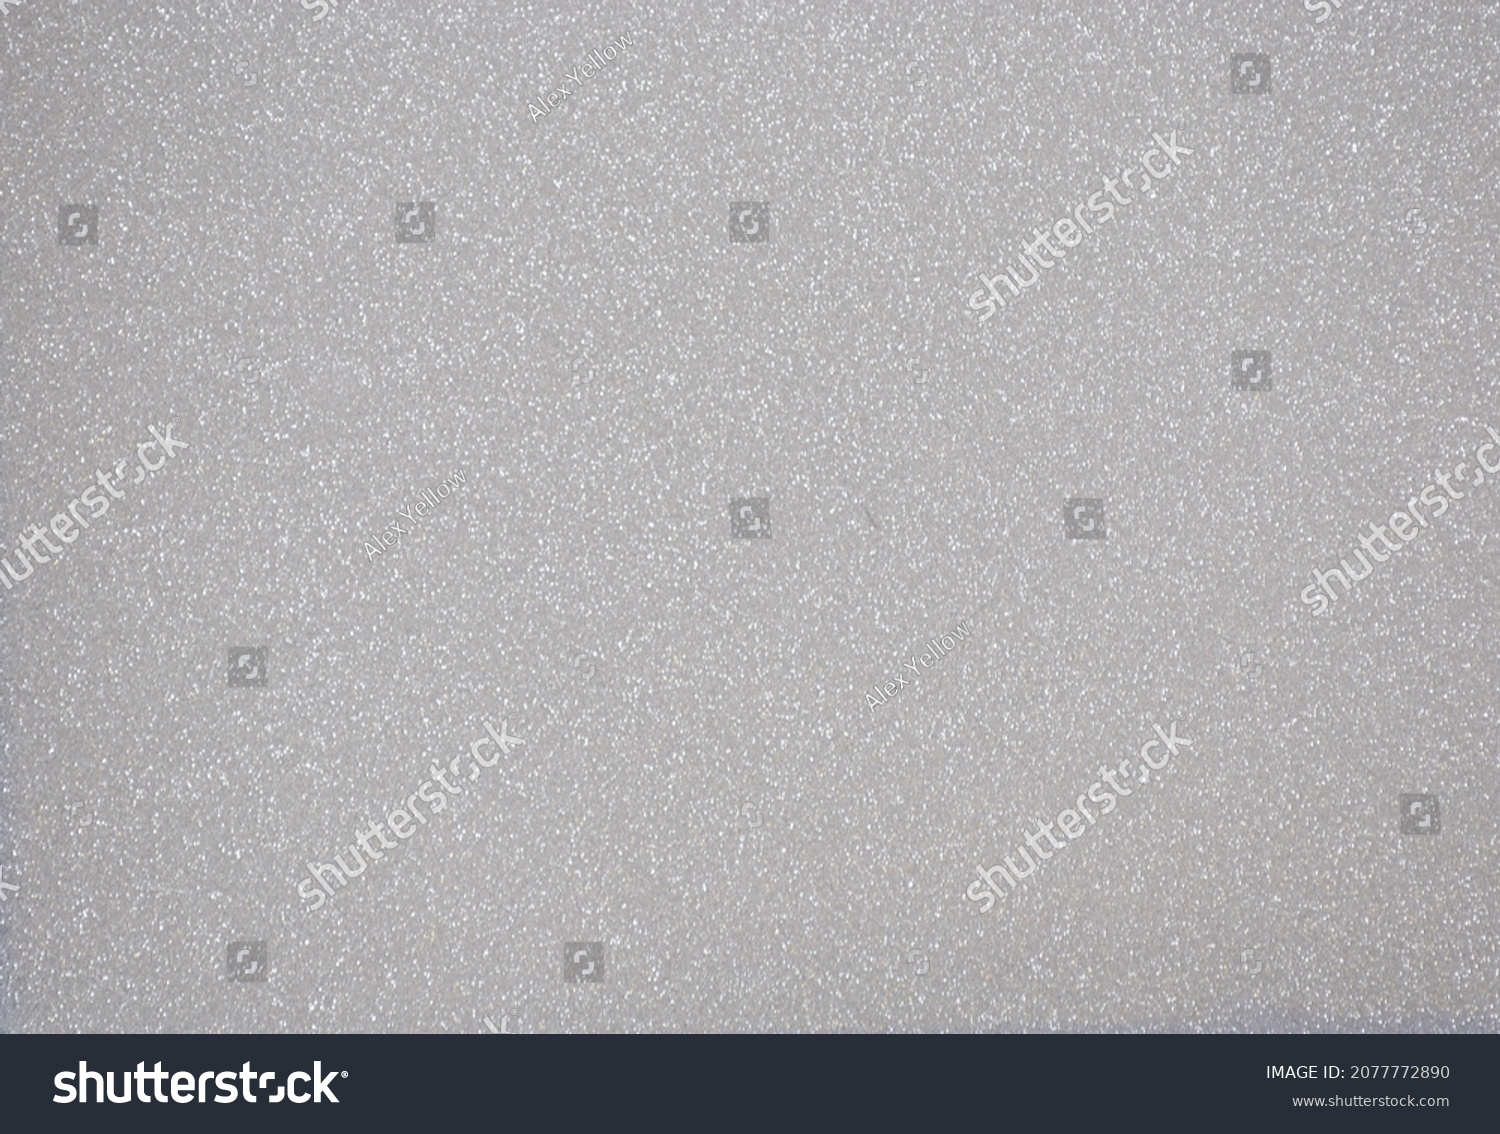 Monochrome dark gray surface with a scattering of small silvery sparkles. Background, pattern, texture. #2077772890